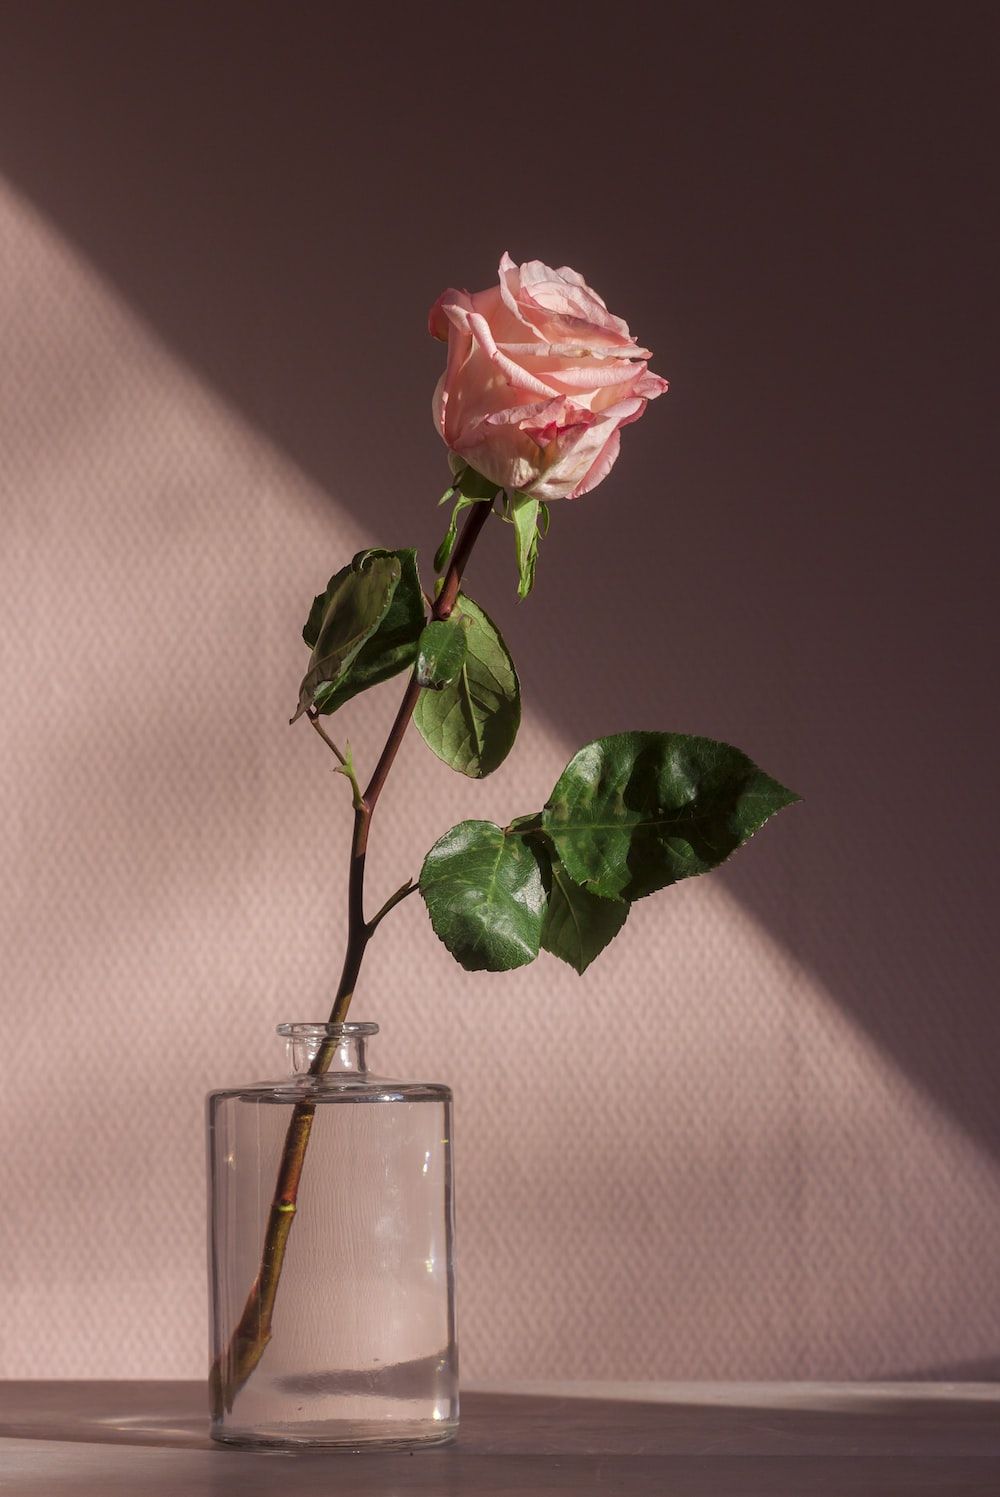 A single rose in vase on table - Warm, flower, roses